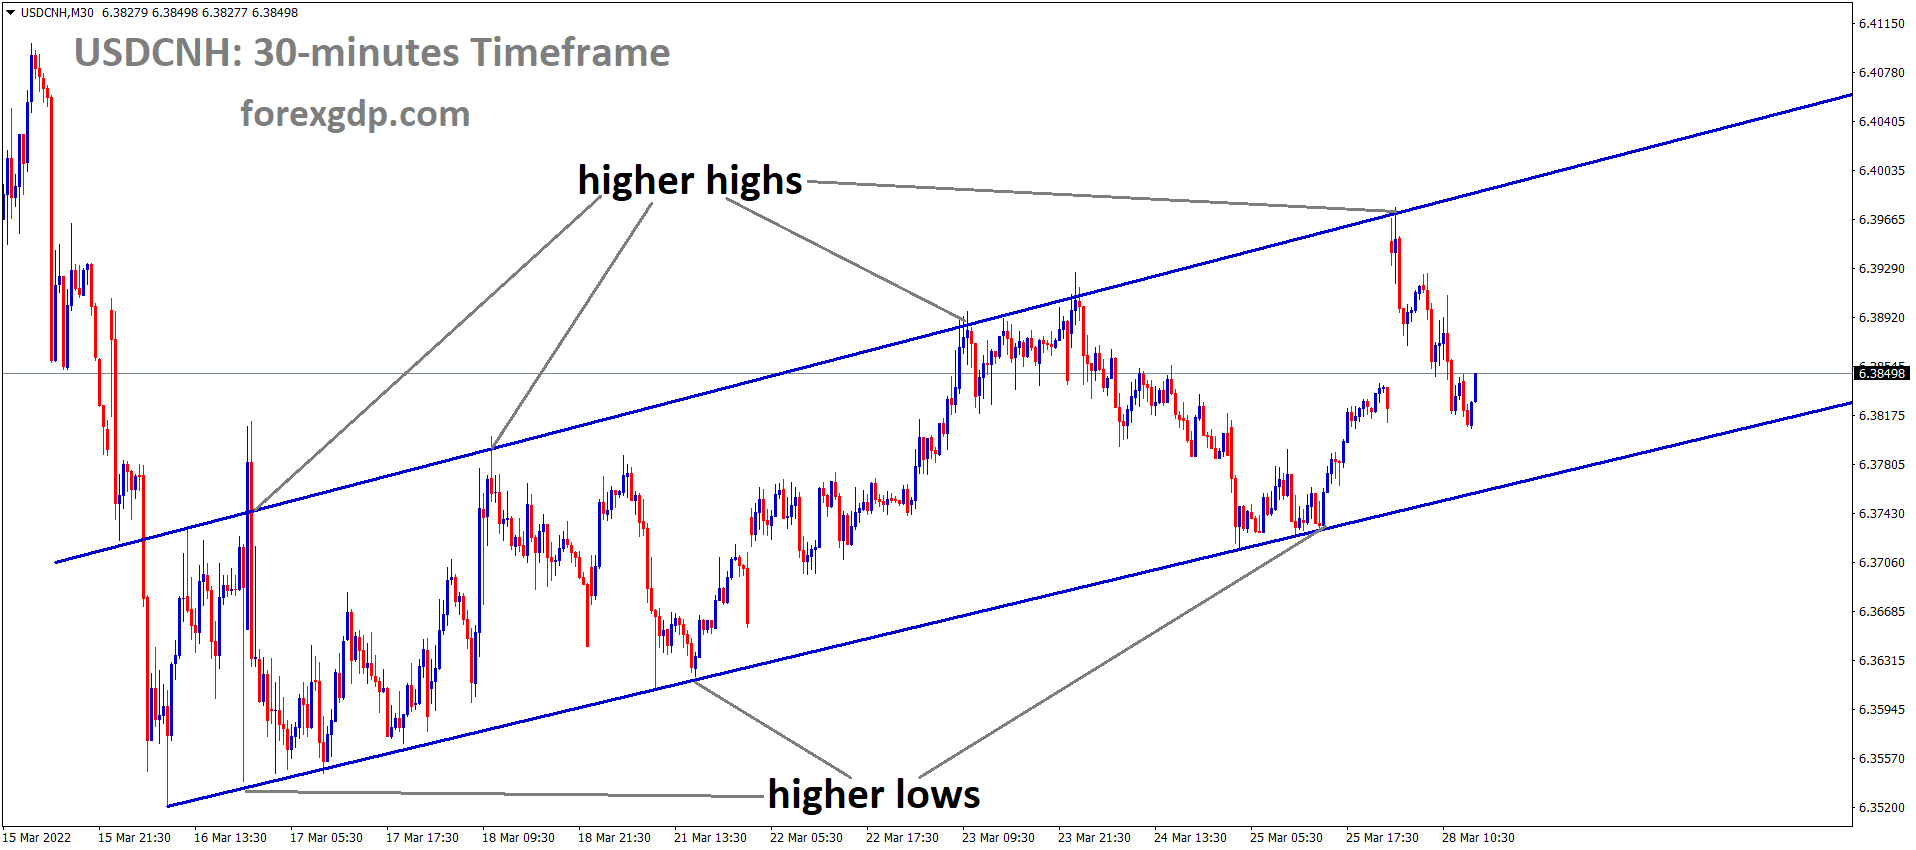 USDCNH M30 Time frame Market has fallen from the higher high area of the Ascending channel pattern